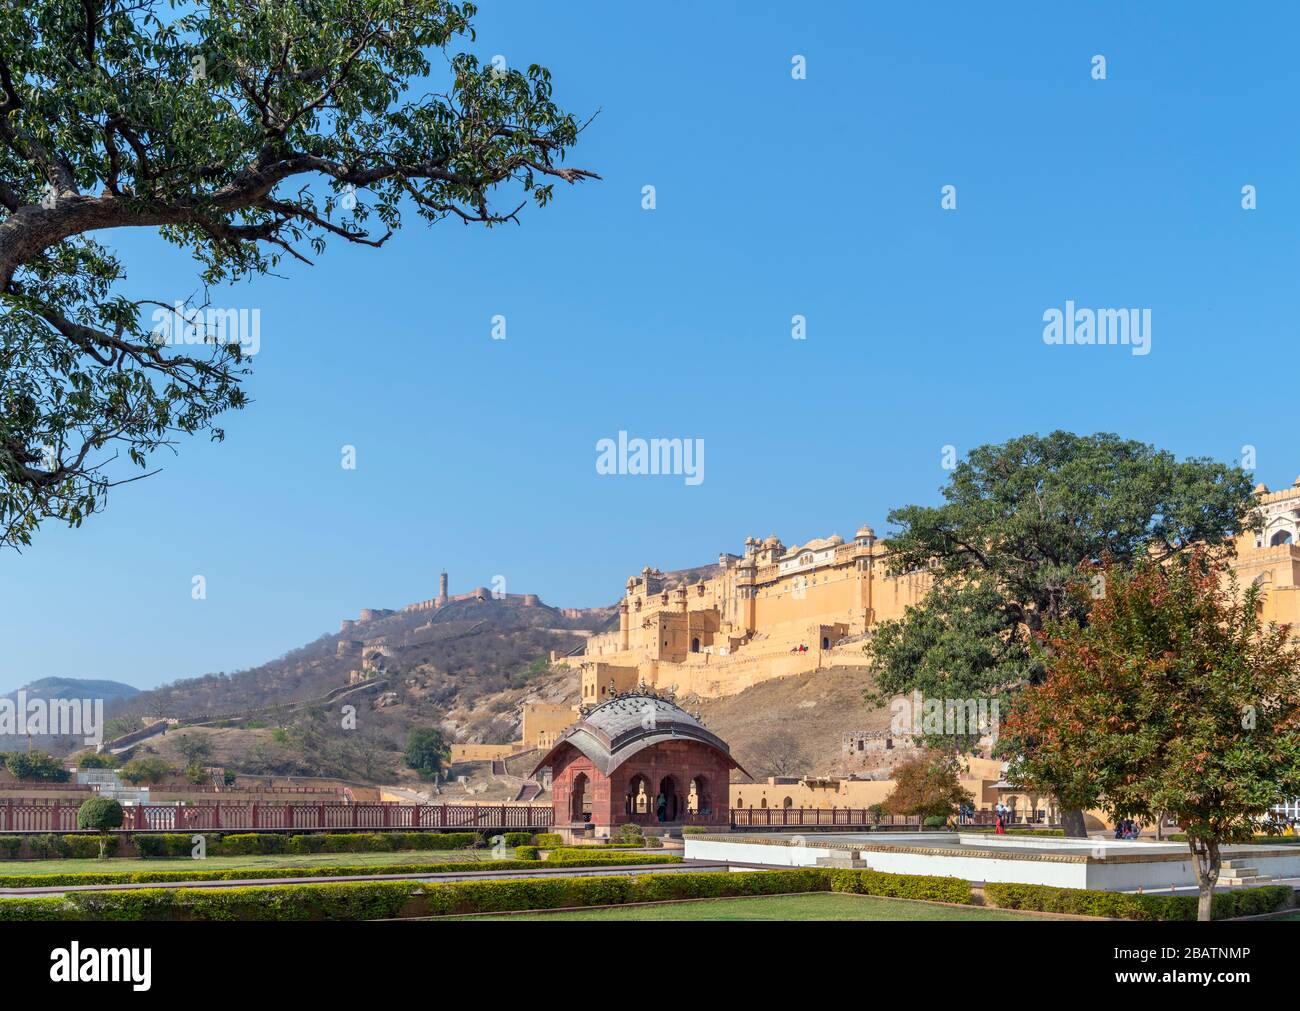 Amber Fort, Jaipur. Il Forte Amber (Forte Amer) dai giardini DIL Aaram Bagh con il Forte Jaigarh dietro, Jaipur, Rajasthan, India Foto Stock